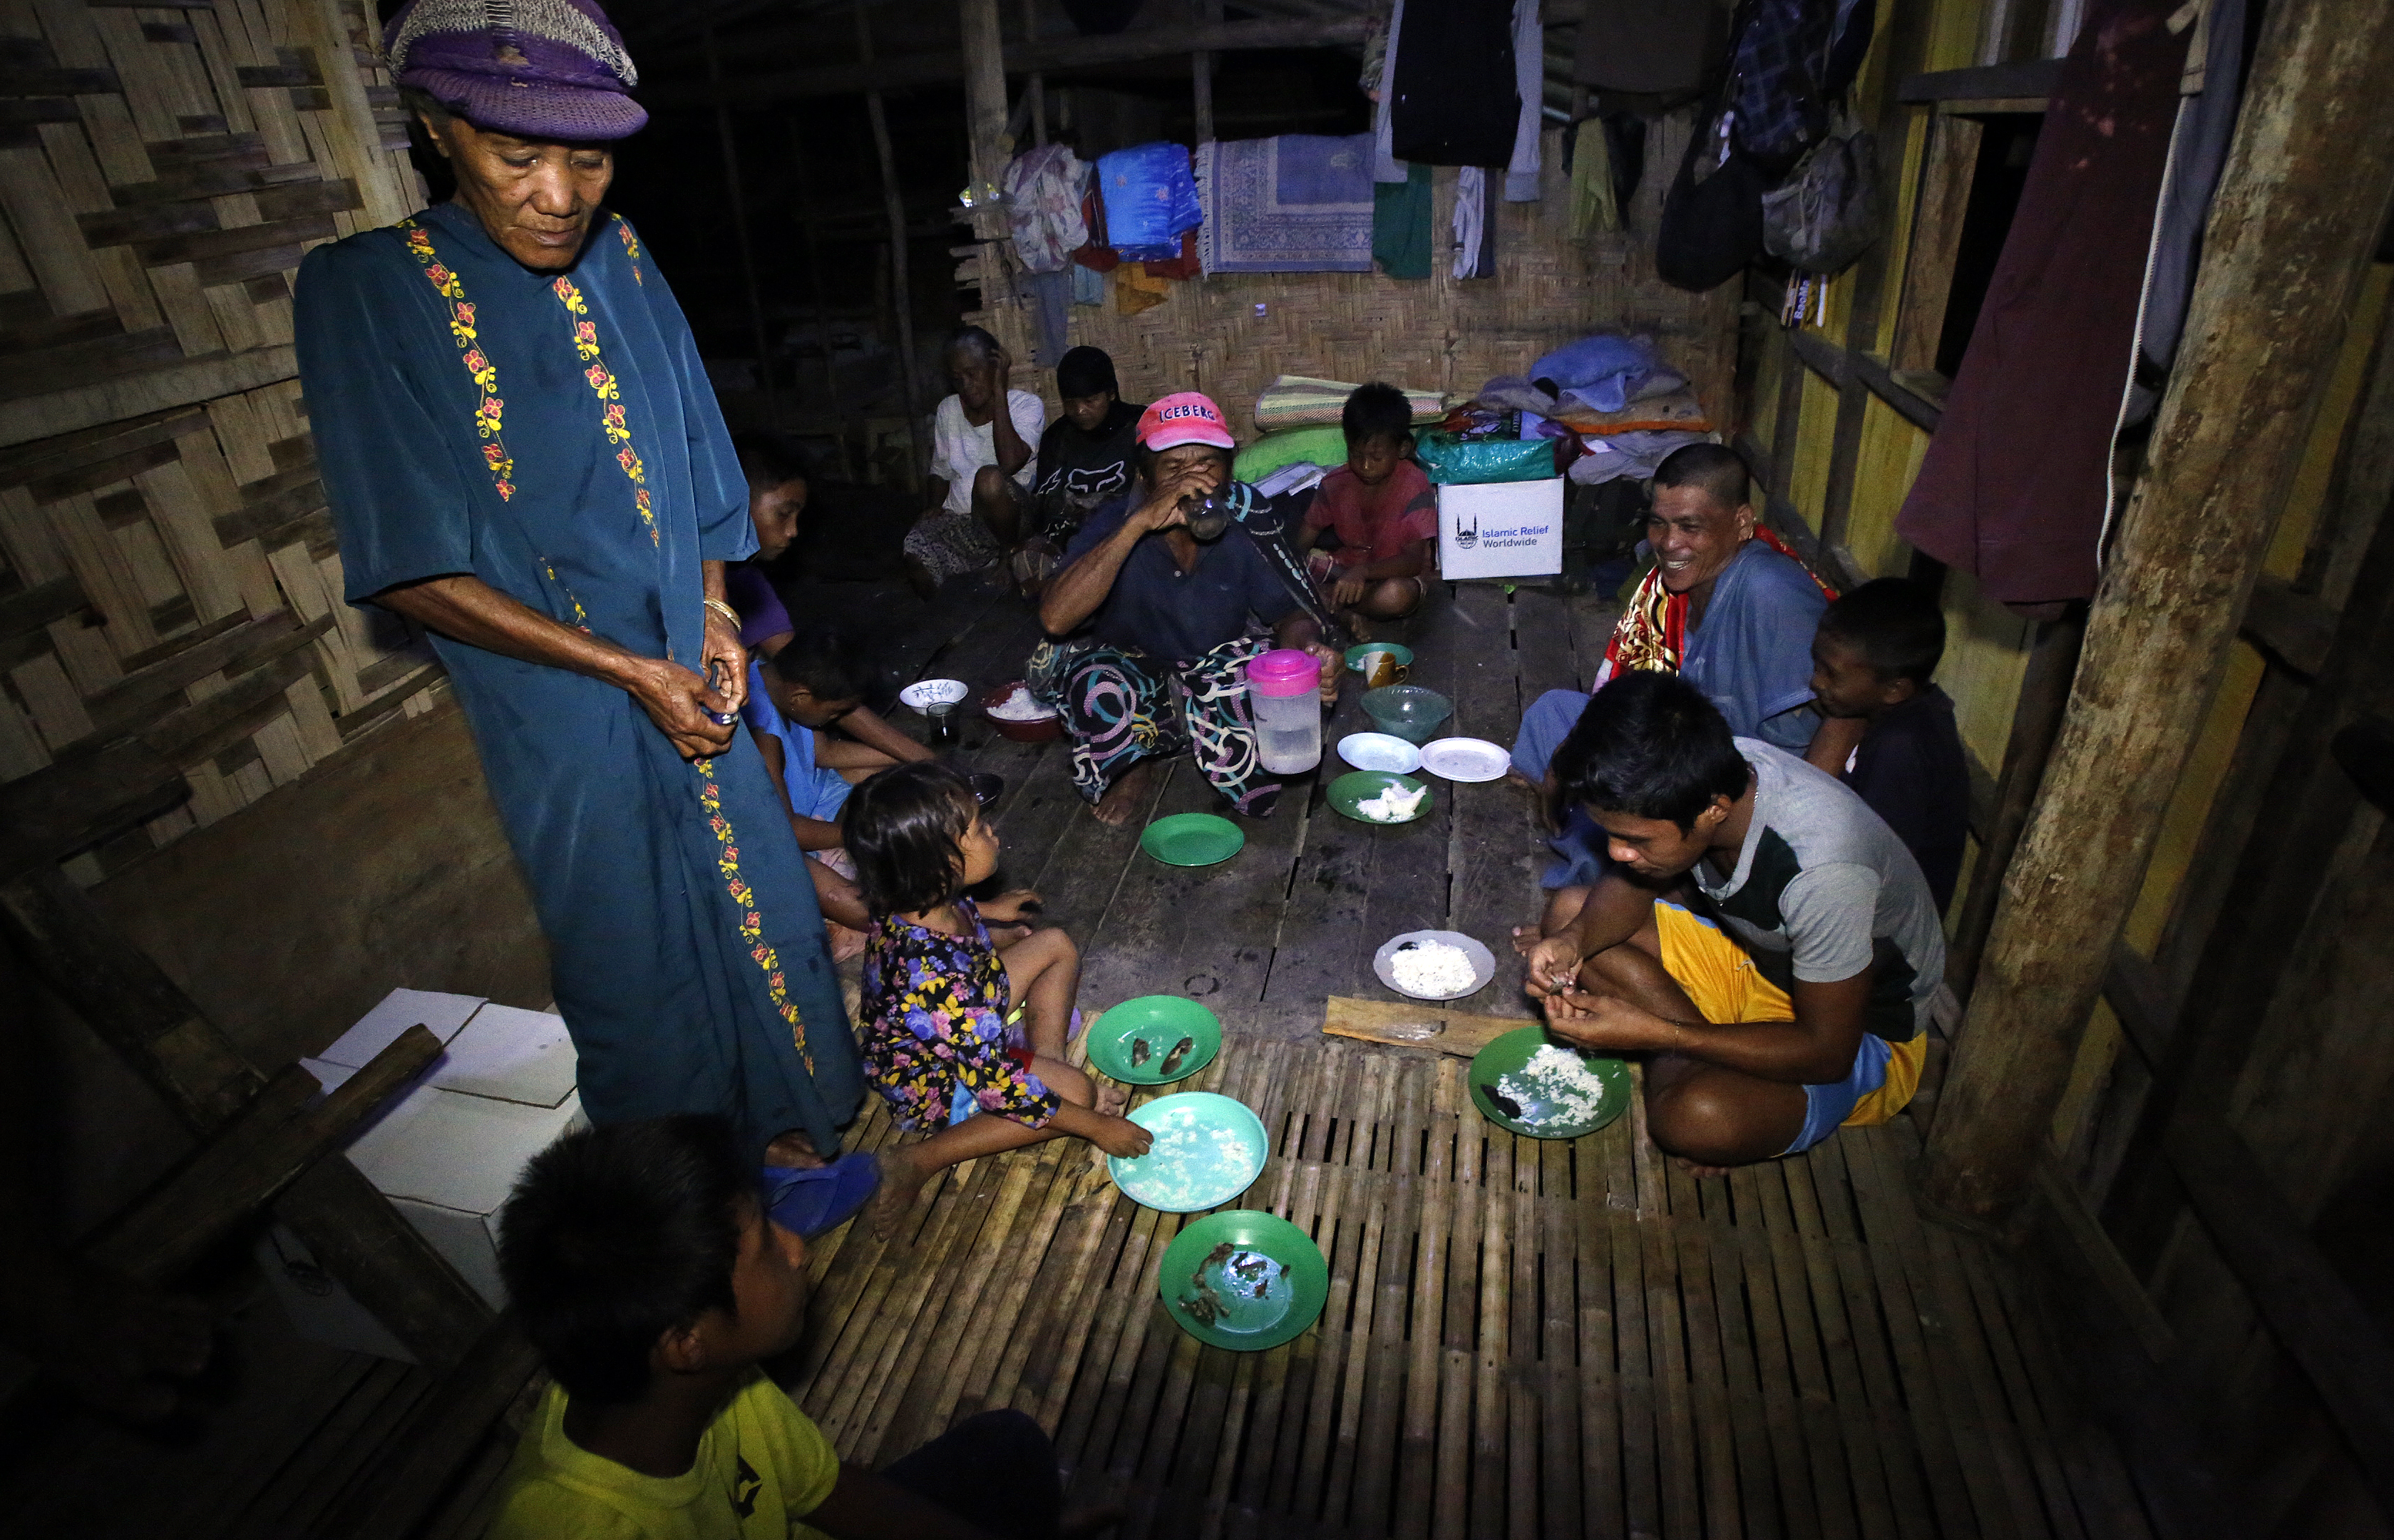 Imam Guiamed Nur sits with his neighbours in their community hut to break fast together.